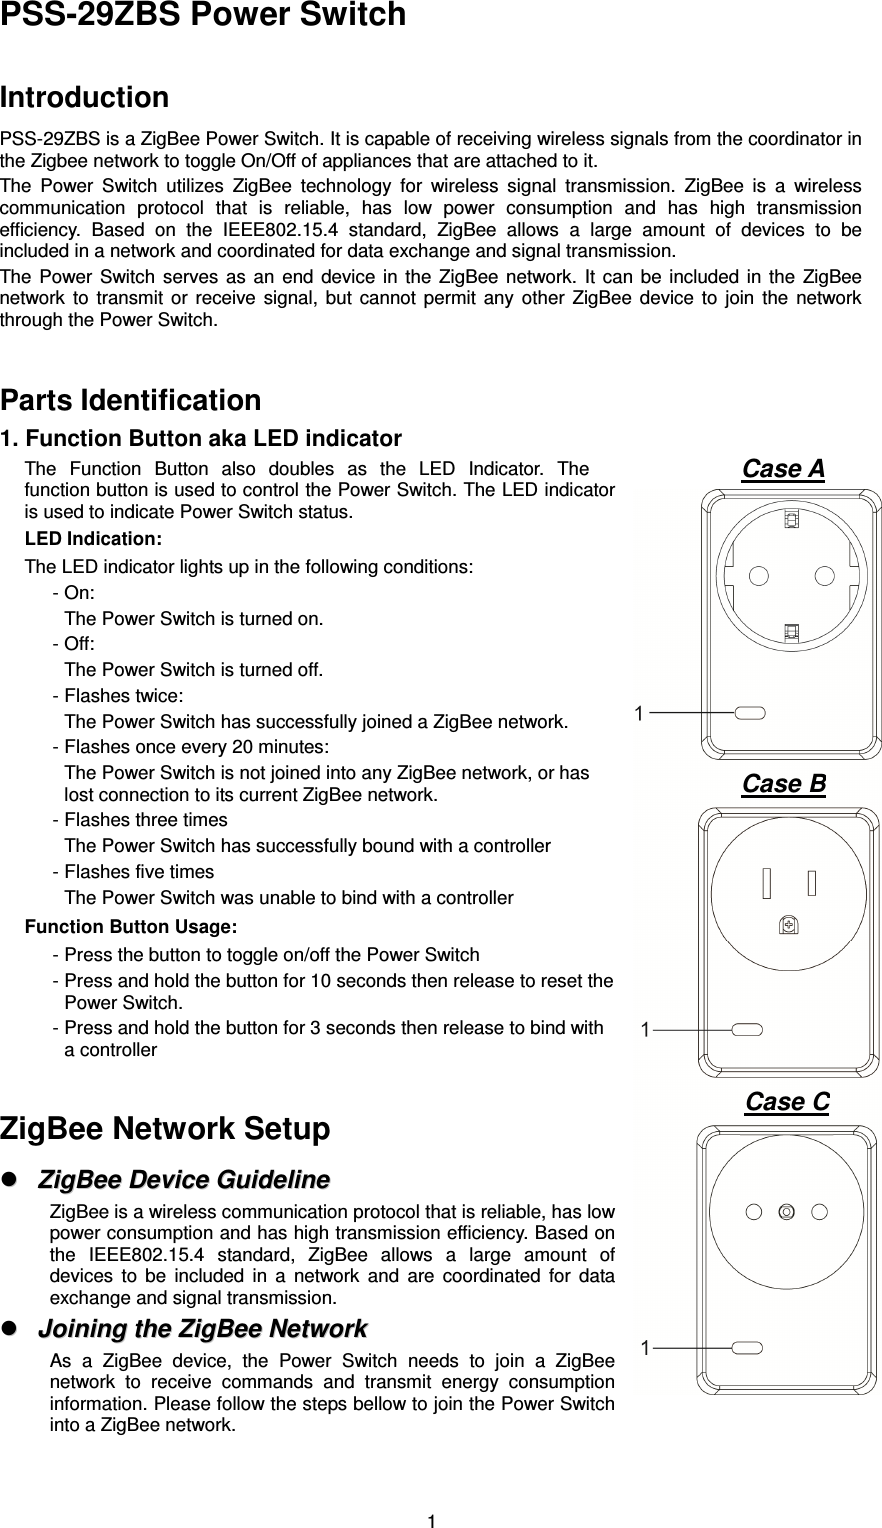  1PSS-29ZBS Power Switch  Introduction PSS-29ZBS is a ZigBee Power Switch. It is capable of receiving wireless signals from the coordinator in the Zigbee network to toggle On/Off of appliances that are attached to it.   The  Power  Switch  utilizes  ZigBee  technology  for  wireless  signal  transmission.  ZigBee  is  a  wireless communication  protocol  that  is  reliable,  has  low  power  consumption  and  has  high  transmission efficiency.  Based  on  the  IEEE802.15.4  standard,  ZigBee  allows  a  large  amount  of  devices  to  be included in a network and coordinated for data exchange and signal transmission. The  Power  Switch  serves  as  an  end  device  in  the  ZigBee  network.  It  can  be  included  in  the  ZigBee network  to  transmit  or  receive  signal,  but  cannot  permit  any  other  ZigBee  device  to  join  the  network through the Power Switch.  Parts Identification 1. Function Button aka LED indicator The  Function  Button  also  doubles  as  the  LED  Indicator.  The function button is used to control the Power Switch. The LED indicator is used to indicate Power Switch status.     LED Indication:     The LED indicator lights up in the following conditions: - On: The Power Switch is turned on.   - Off: The Power Switch is turned off.   - Flashes twice: The Power Switch has successfully joined a ZigBee network.   - Flashes once every 20 minutes: The Power Switch is not joined into any ZigBee network, or has lost connection to its current ZigBee network. - Flashes three times The Power Switch has successfully bound with a controller - Flashes five times The Power Switch was unable to bind with a controller Function Button Usage:     - Press the button to toggle on/off the Power Switch - Press and hold the button for 10 seconds then release to reset the Power Switch. - Press and hold the button for 3 seconds then release to bind with a controller  ZigBee Network Setup   ZZiiggBBeeee  DDeevviiccee  GGuuiiddeelliinnee  ZigBee is a wireless communication protocol that is reliable, has low power consumption and has high transmission efficiency. Based on the  IEEE802.15.4  standard,  ZigBee  allows  a  large  amount  of devices  to  be  included  in  a  network  and  are  coordinated  for  data exchange and signal transmission.   JJooiinniinngg  tthhee  ZZiiggBBeeee  NNeettwwoorrkk  As  a  ZigBee  device,  the  Power  Switch  needs  to  join  a  ZigBee network  to  receive  commands  and  transmit  energy  consumption information. Please follow the steps bellow to join the Power Switch into a ZigBee network. Case A Case B Case C 